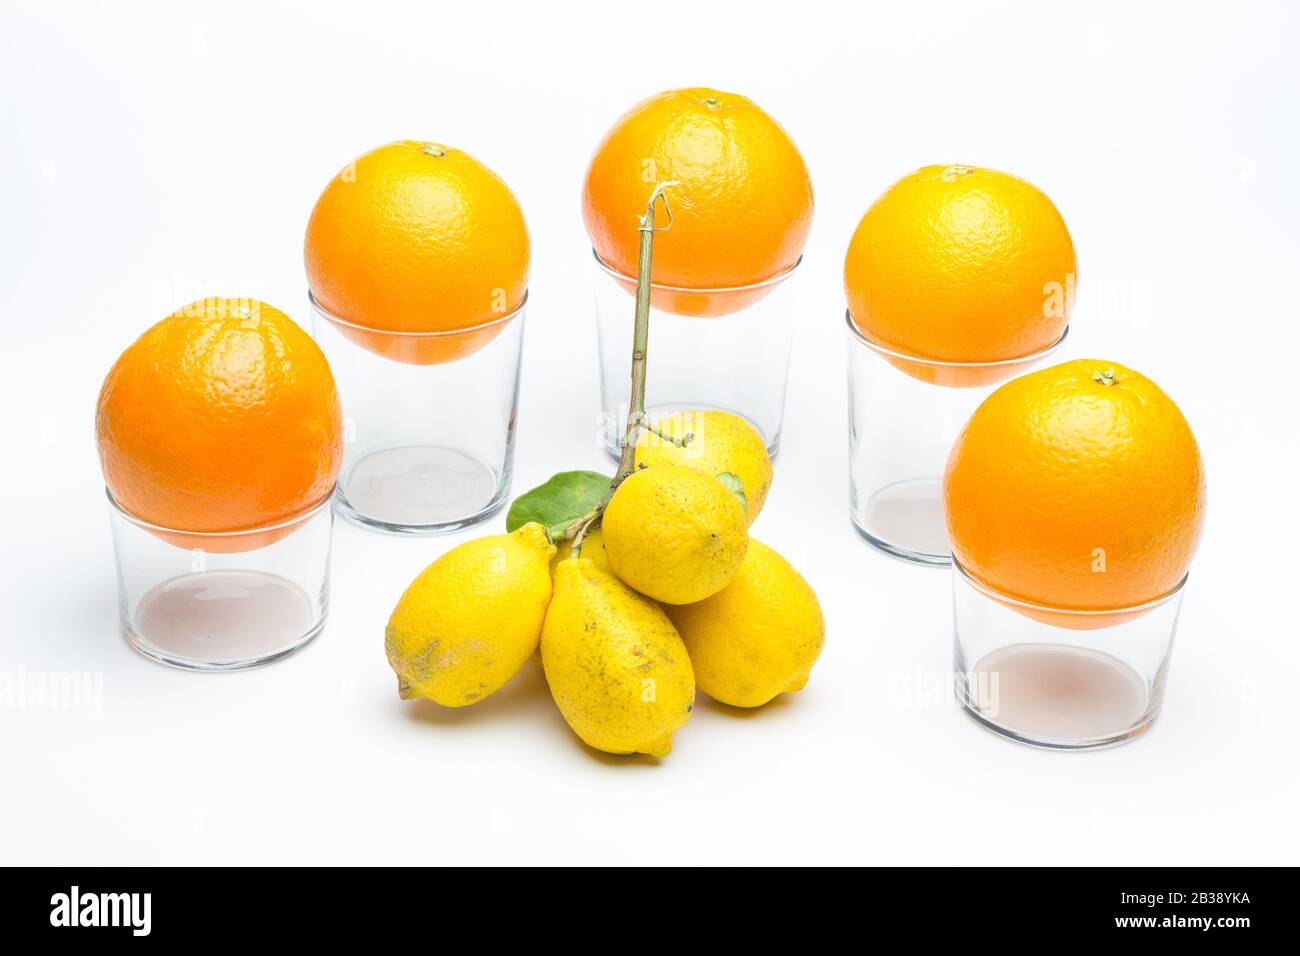 Citrus fruits, oranges and lemons, orange peel oranges and lemon peel yellow; The skins of citrus used in cooking, from its fruit healthy juices are e Stock Photo